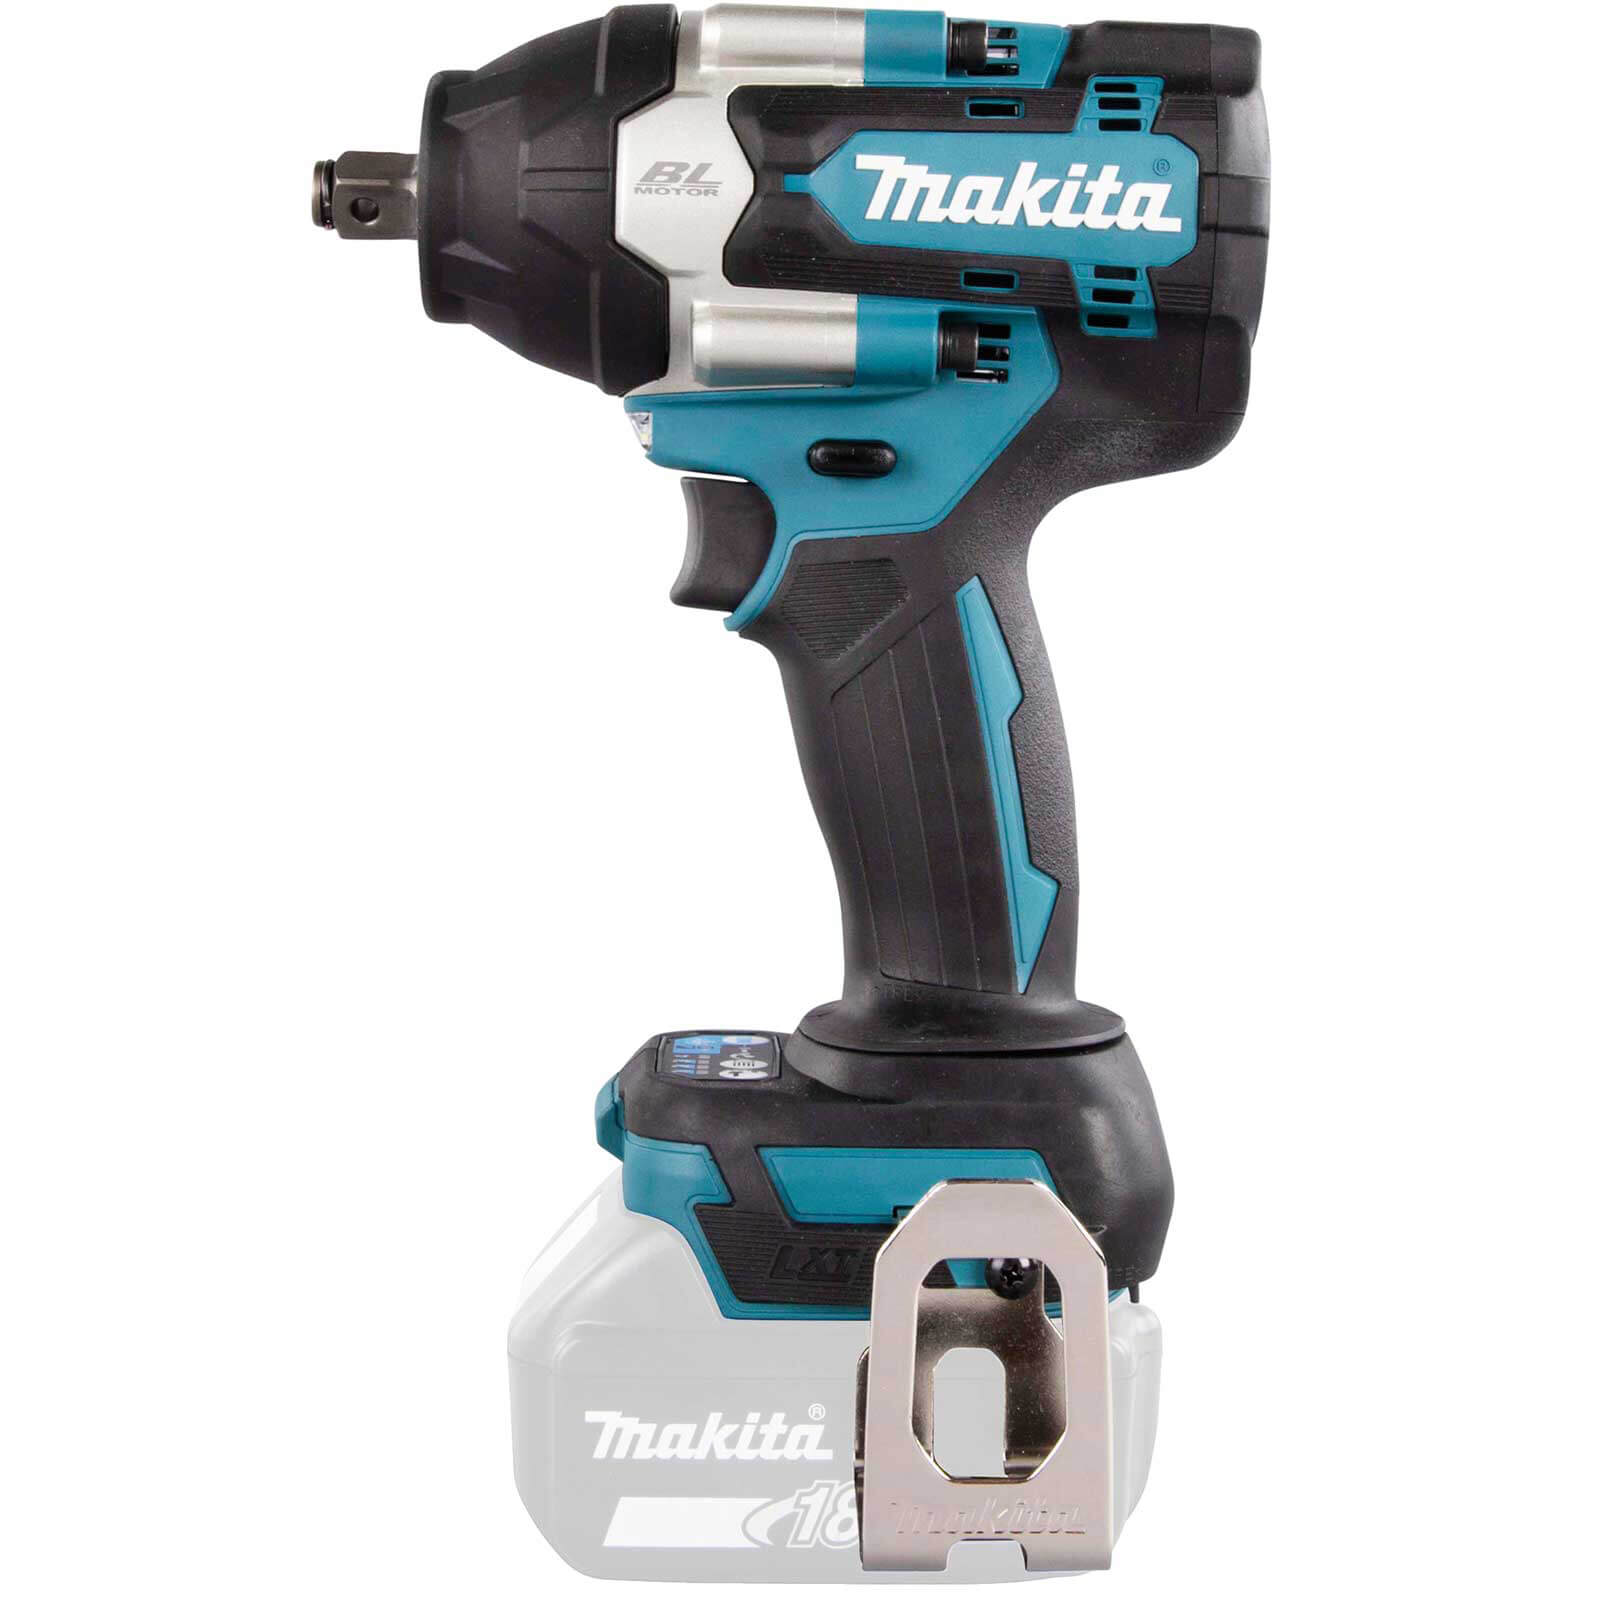 Image of Makita DTW700 18v LXT Cordless Brushless 1/2" Drive Impact Wrench No Batteries No Charger No Case